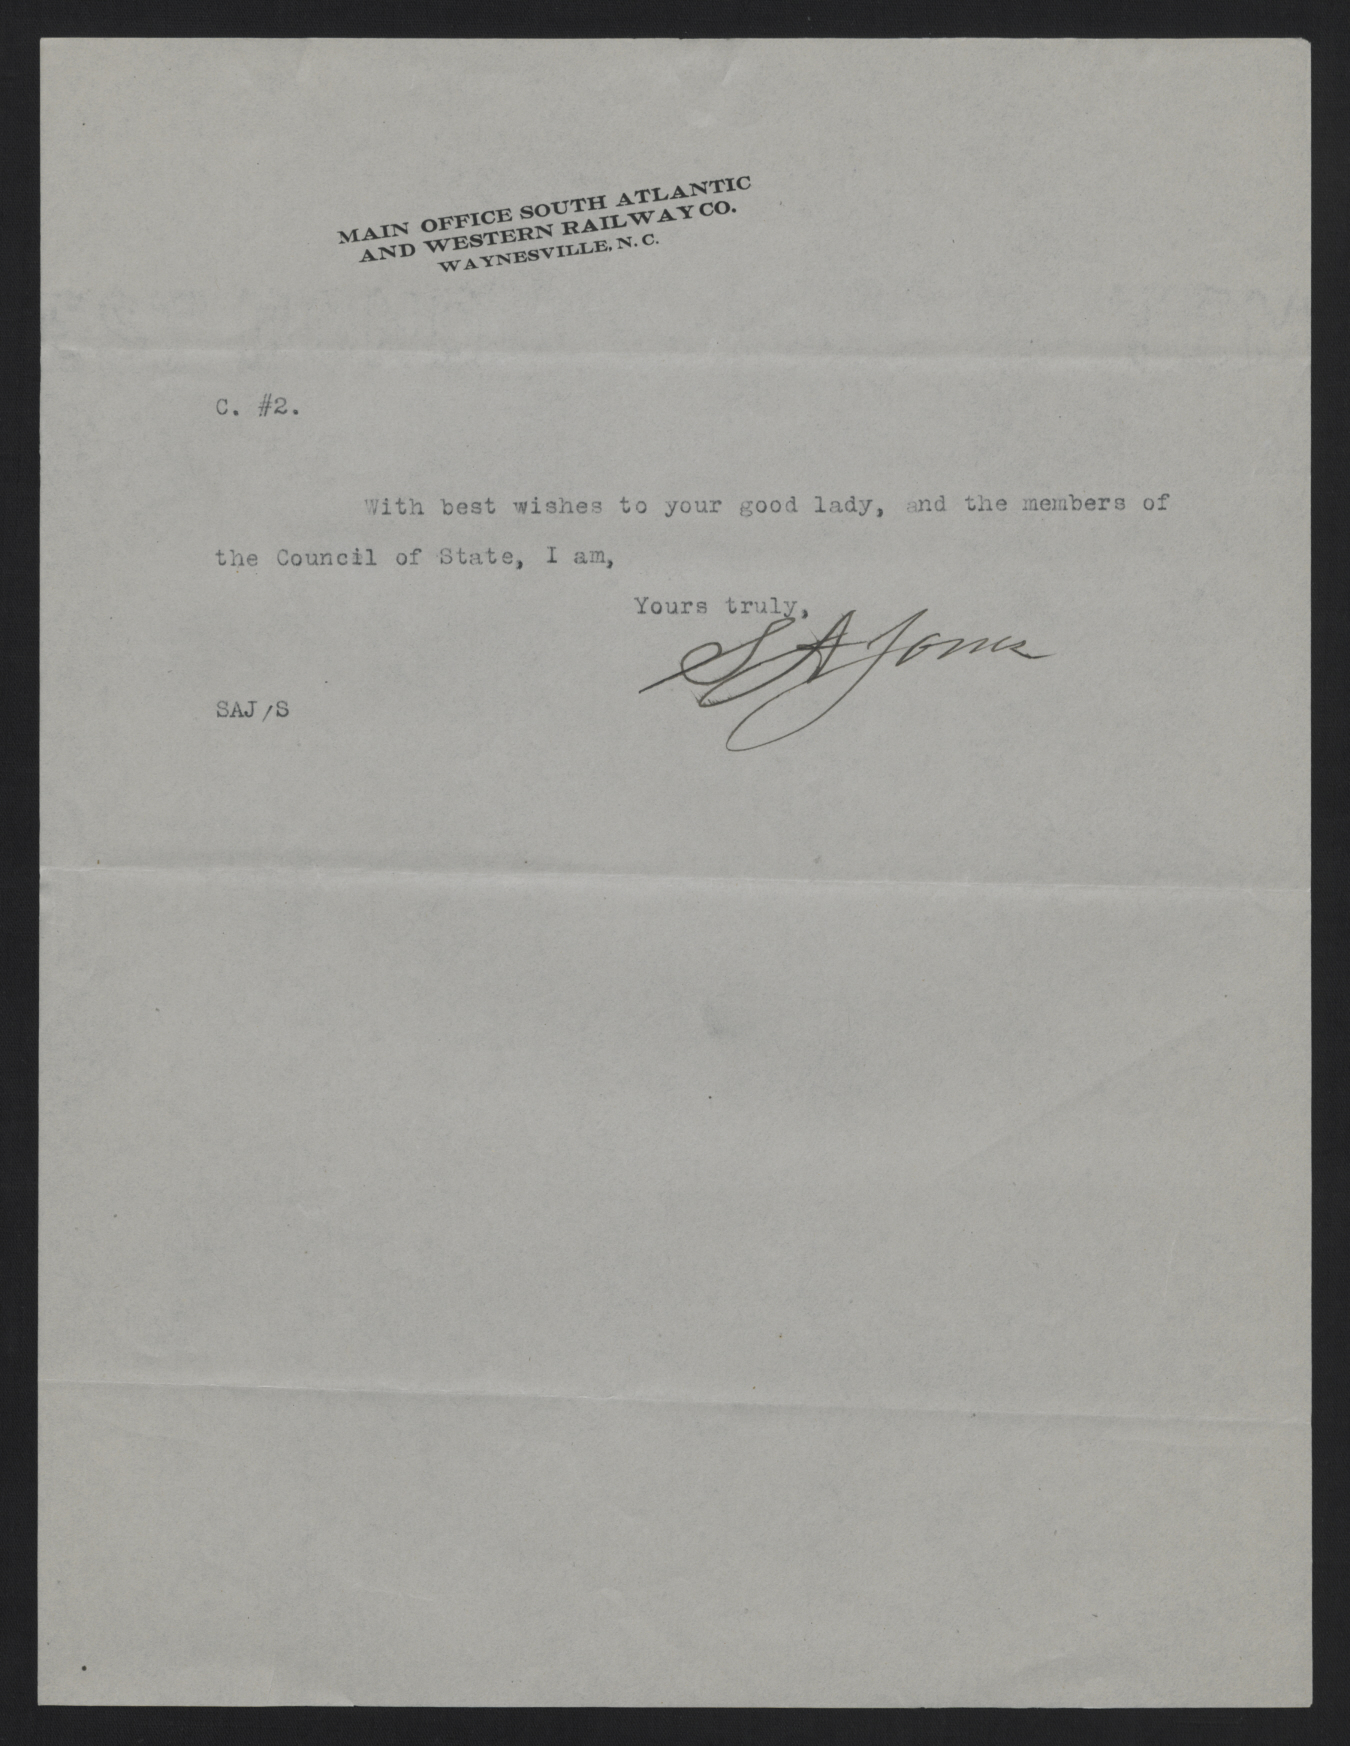 Letter from Jones to Craig, May 23, 1913, page 2